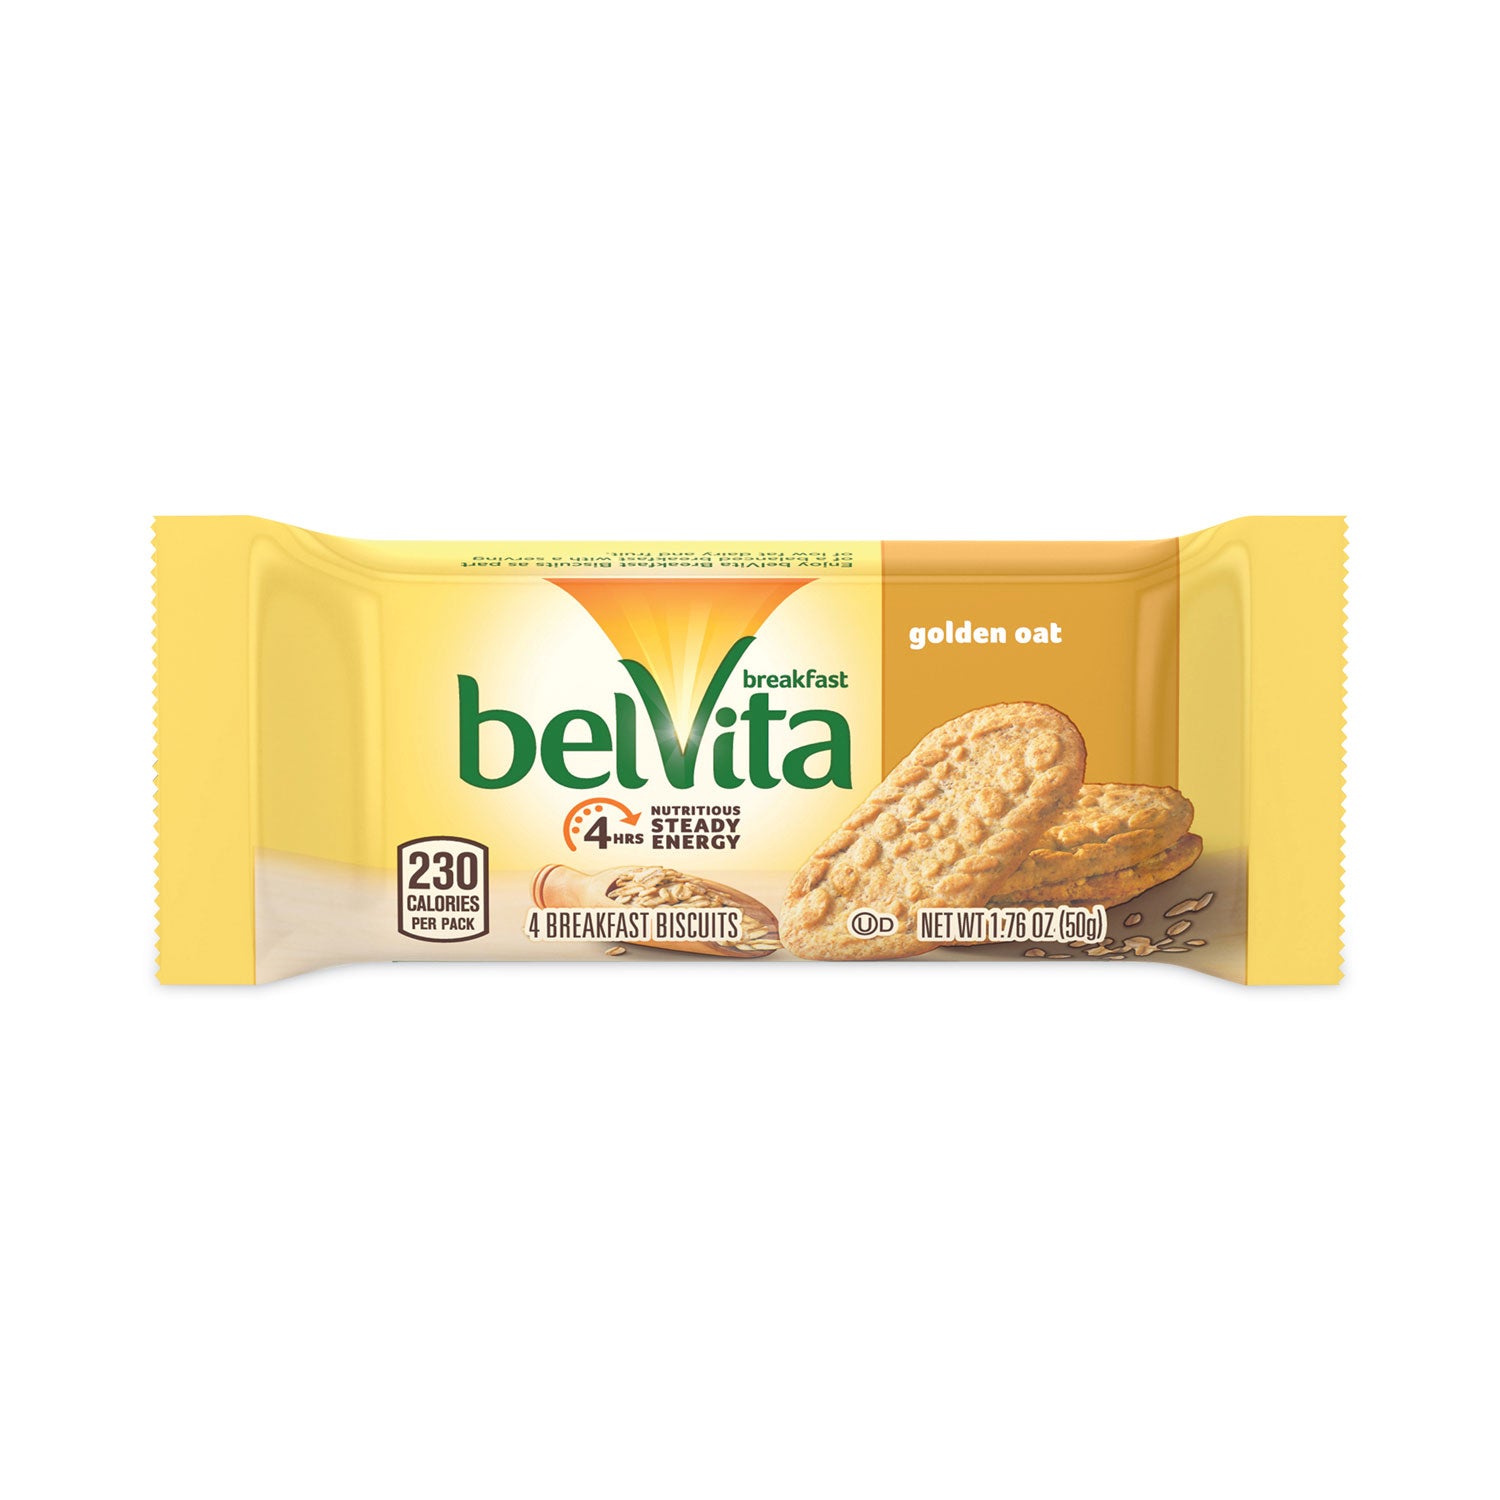 belvita-breakfast-biscuits-golden-oat-176-oz-packet-of-4-12-packets-box-3-boxes-carton-ships-in-1-3-business-days_grr30700147 - 1